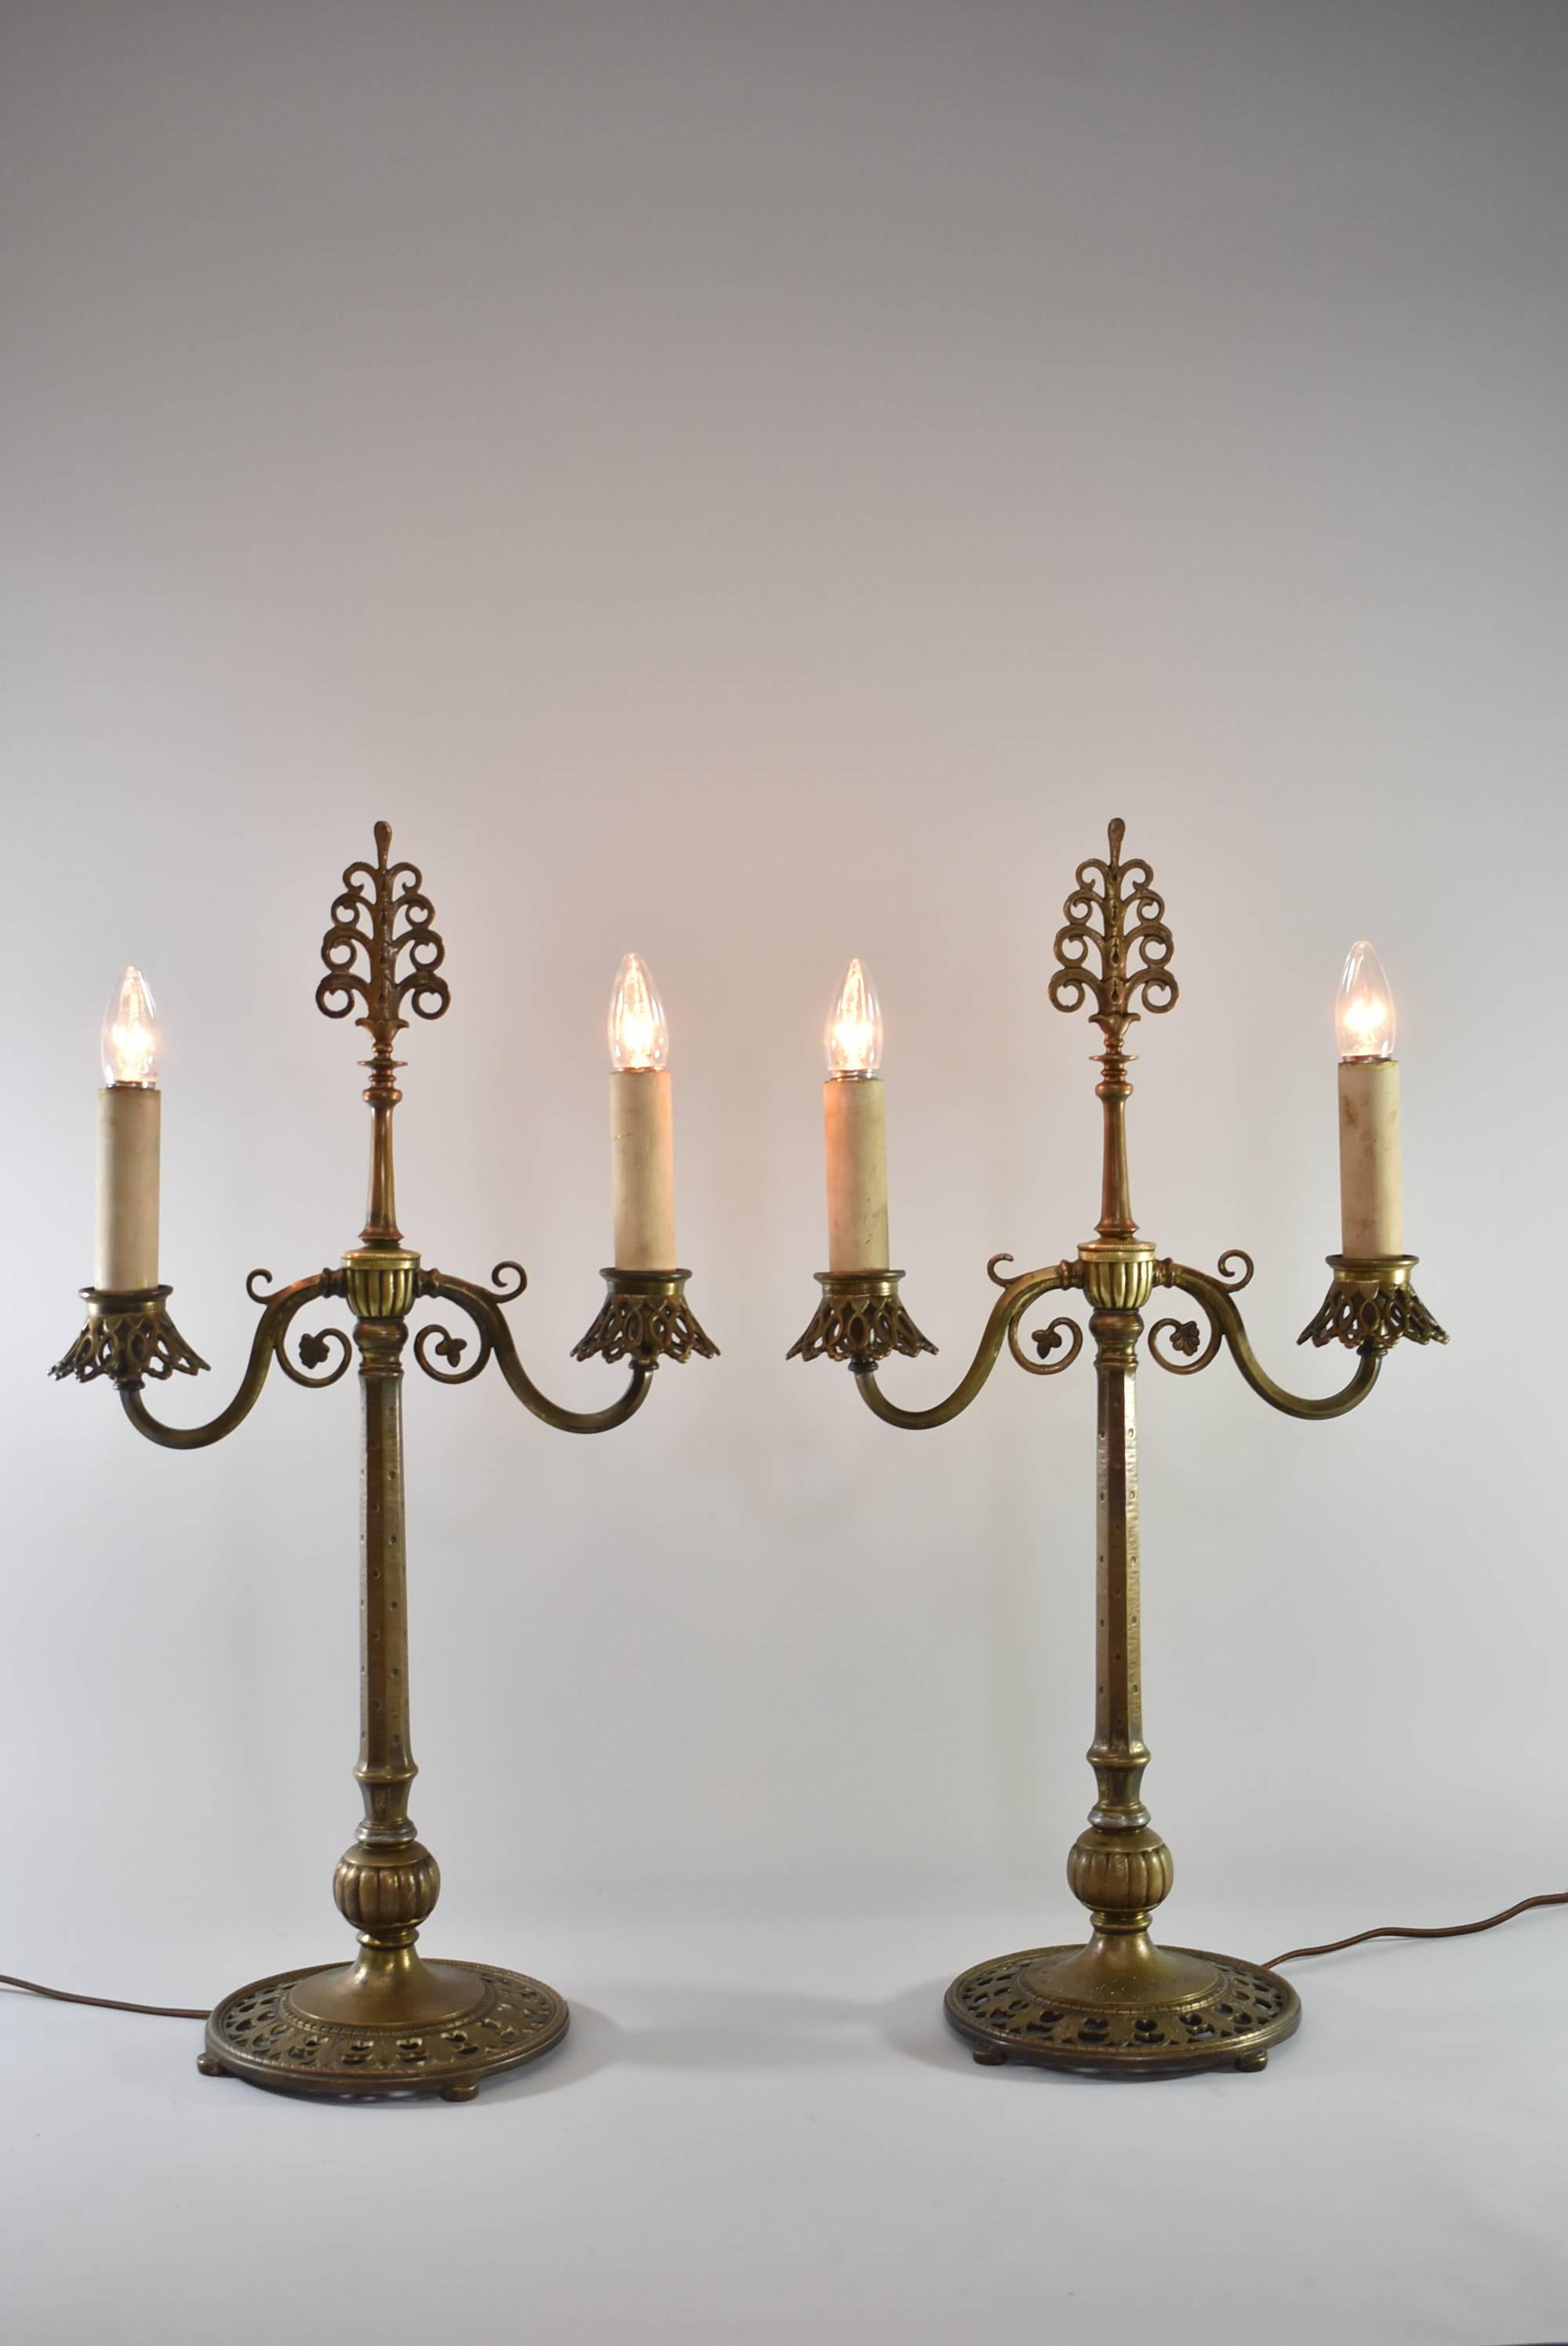 A fantastic pair of buffet lamps by Oscar Bach. Candelabra with two electrified candle sockets on each with mica shades that are included. They have the original bronze candle covers but can be changed out for newer covers. Signed on the base,